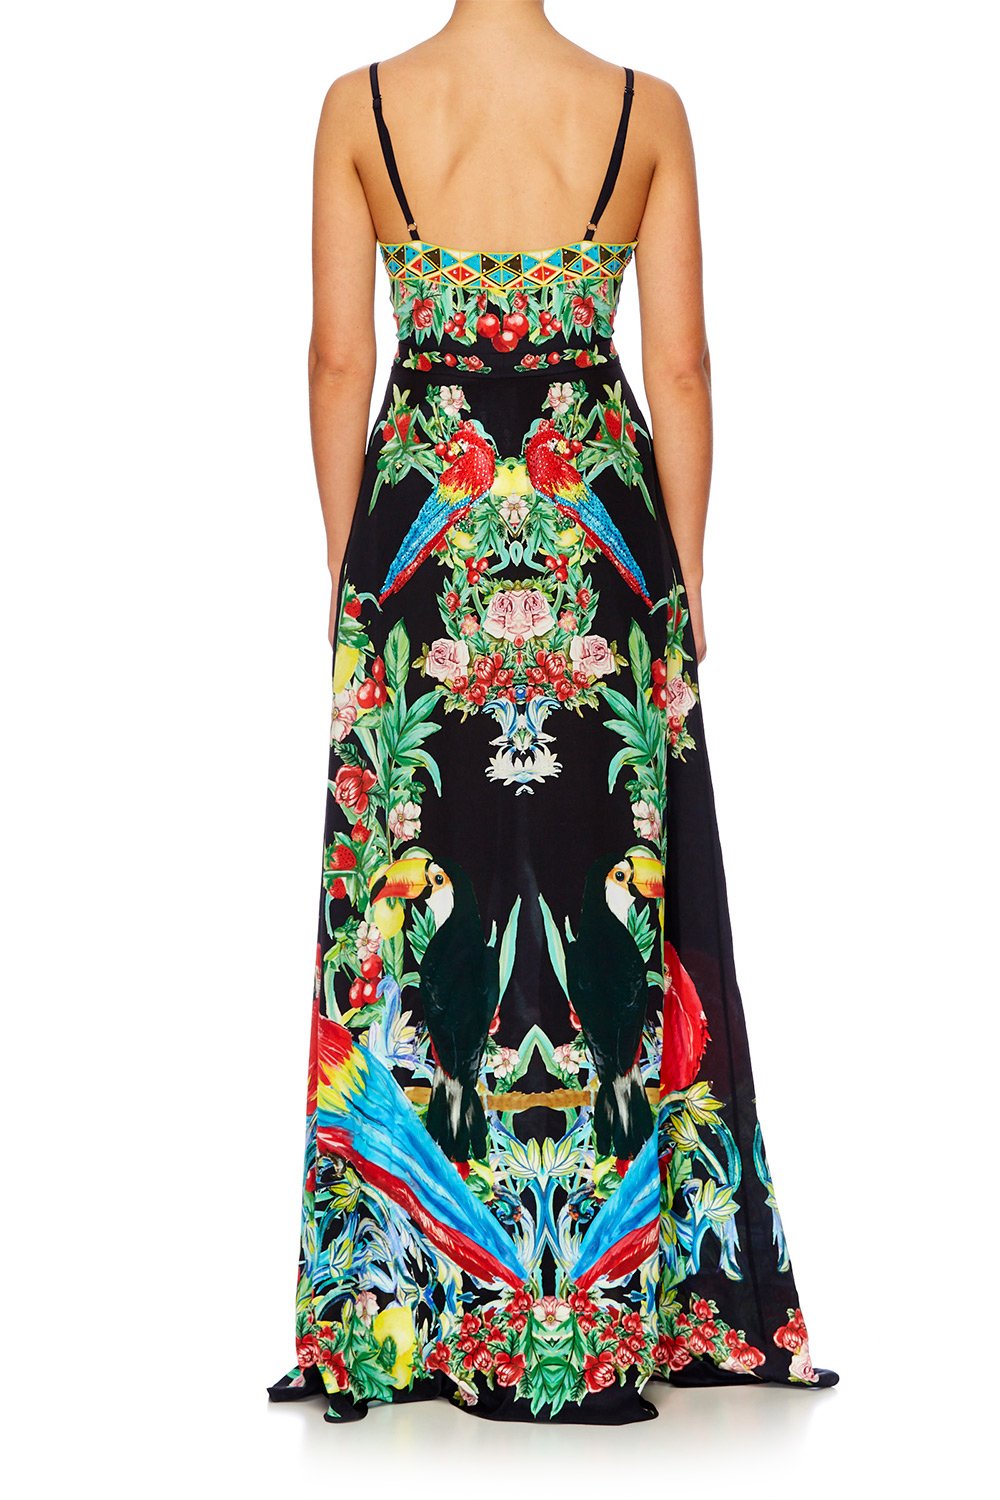 TOUCAN PLAY TIE FRONT CUT OUT MAXI DRESS